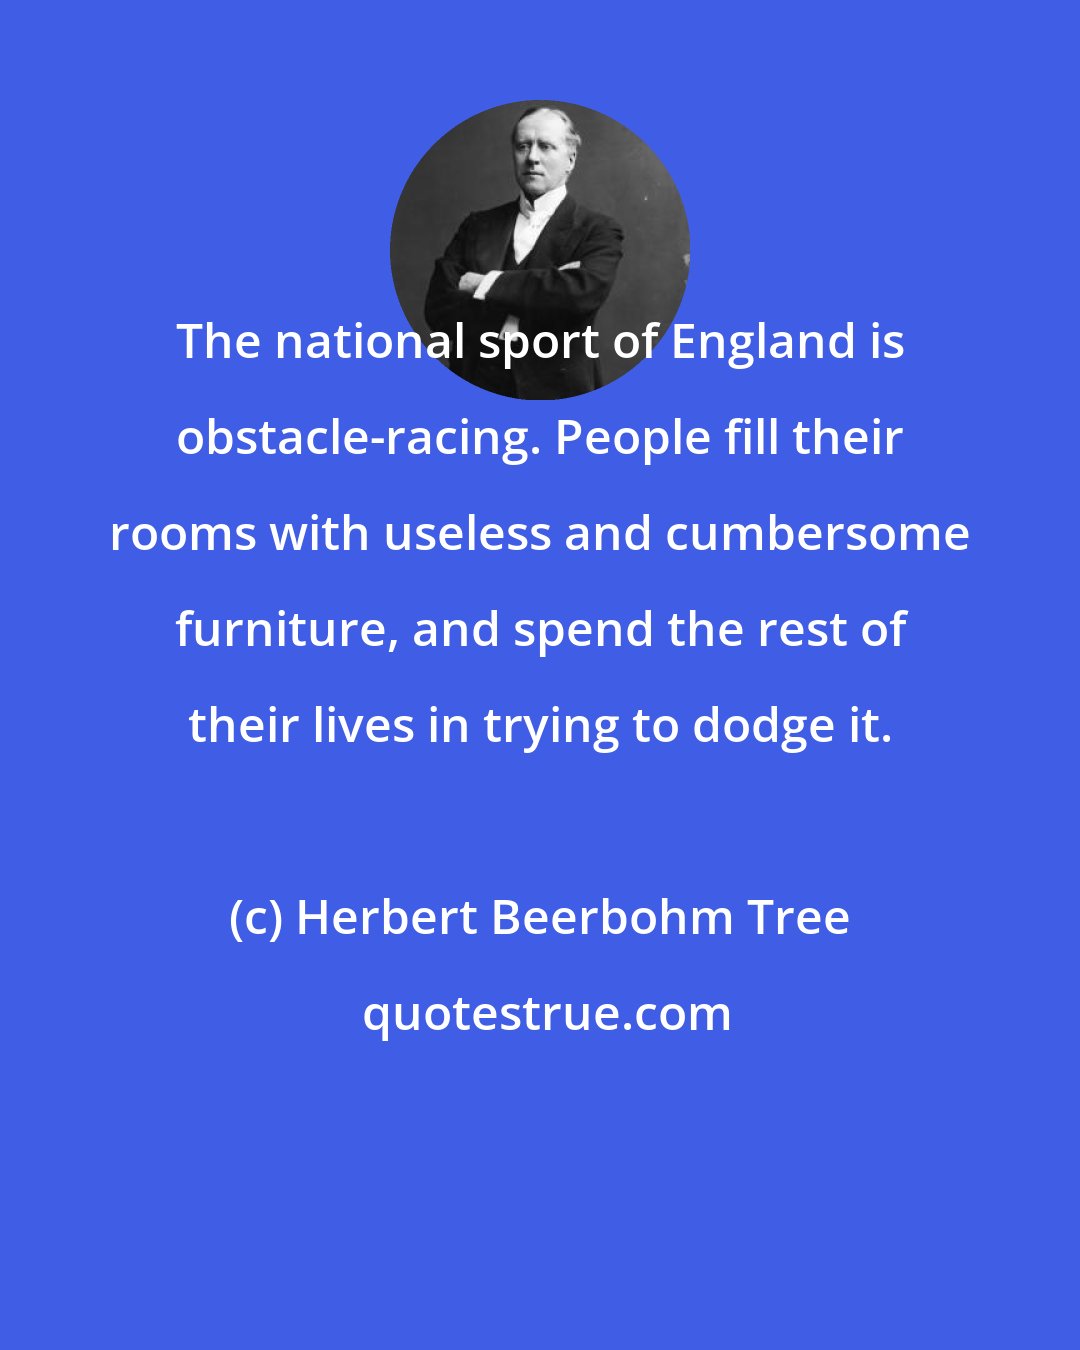 Herbert Beerbohm Tree: The national sport of England is obstacle-racing. People fill their rooms with useless and cumbersome furniture, and spend the rest of their lives in trying to dodge it.